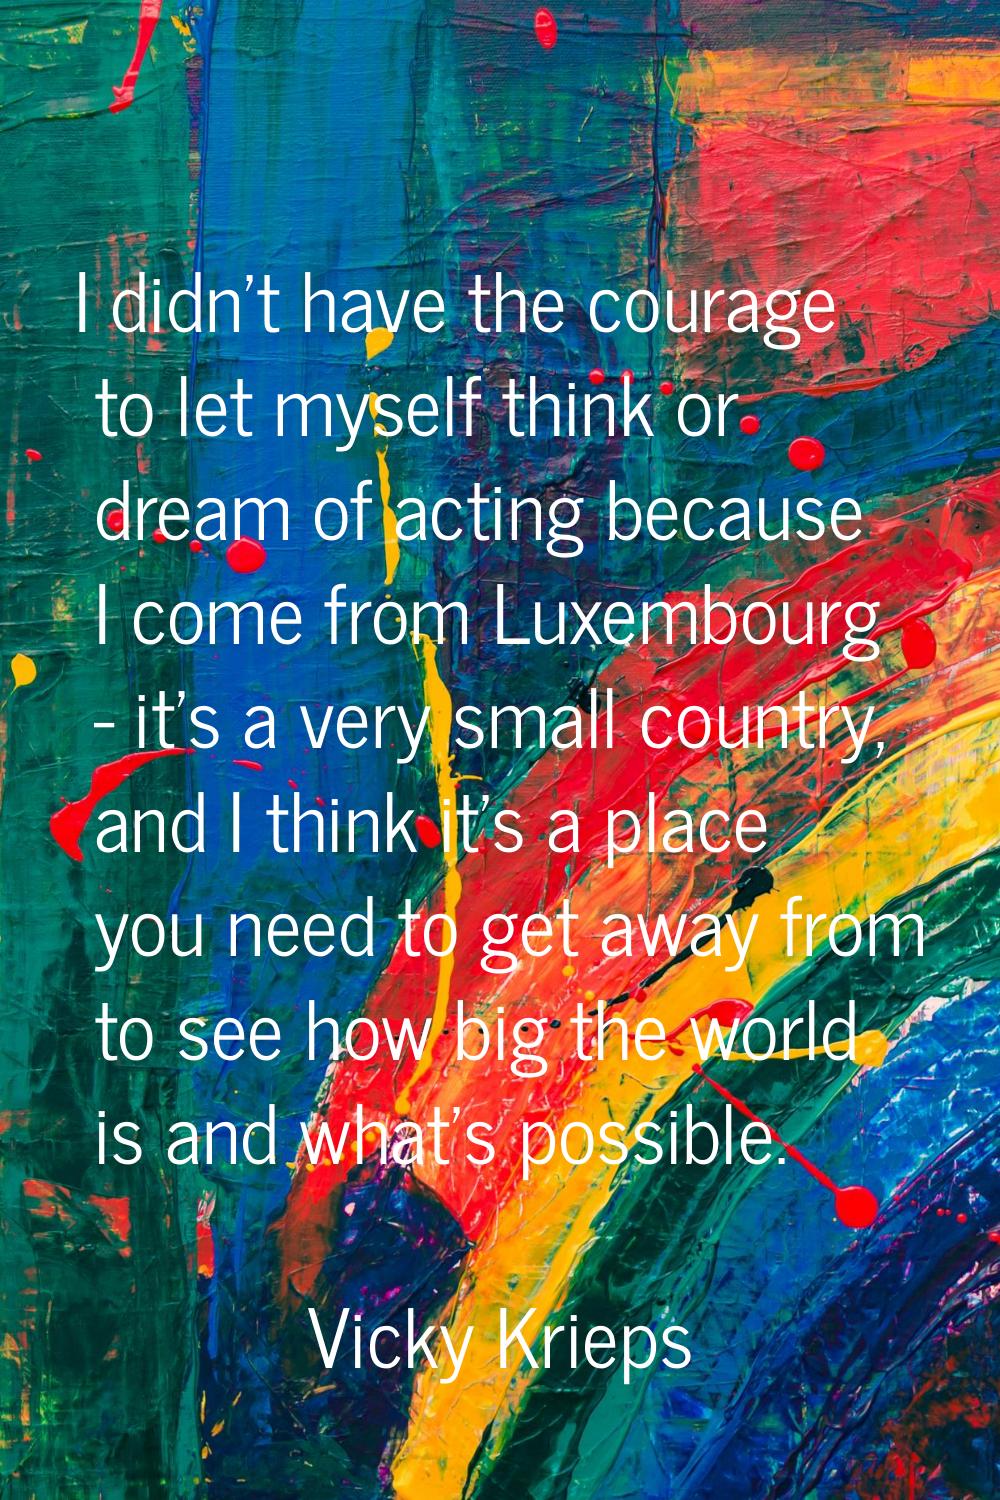 I didn't have the courage to let myself think or dream of acting because I come from Luxembourg - i